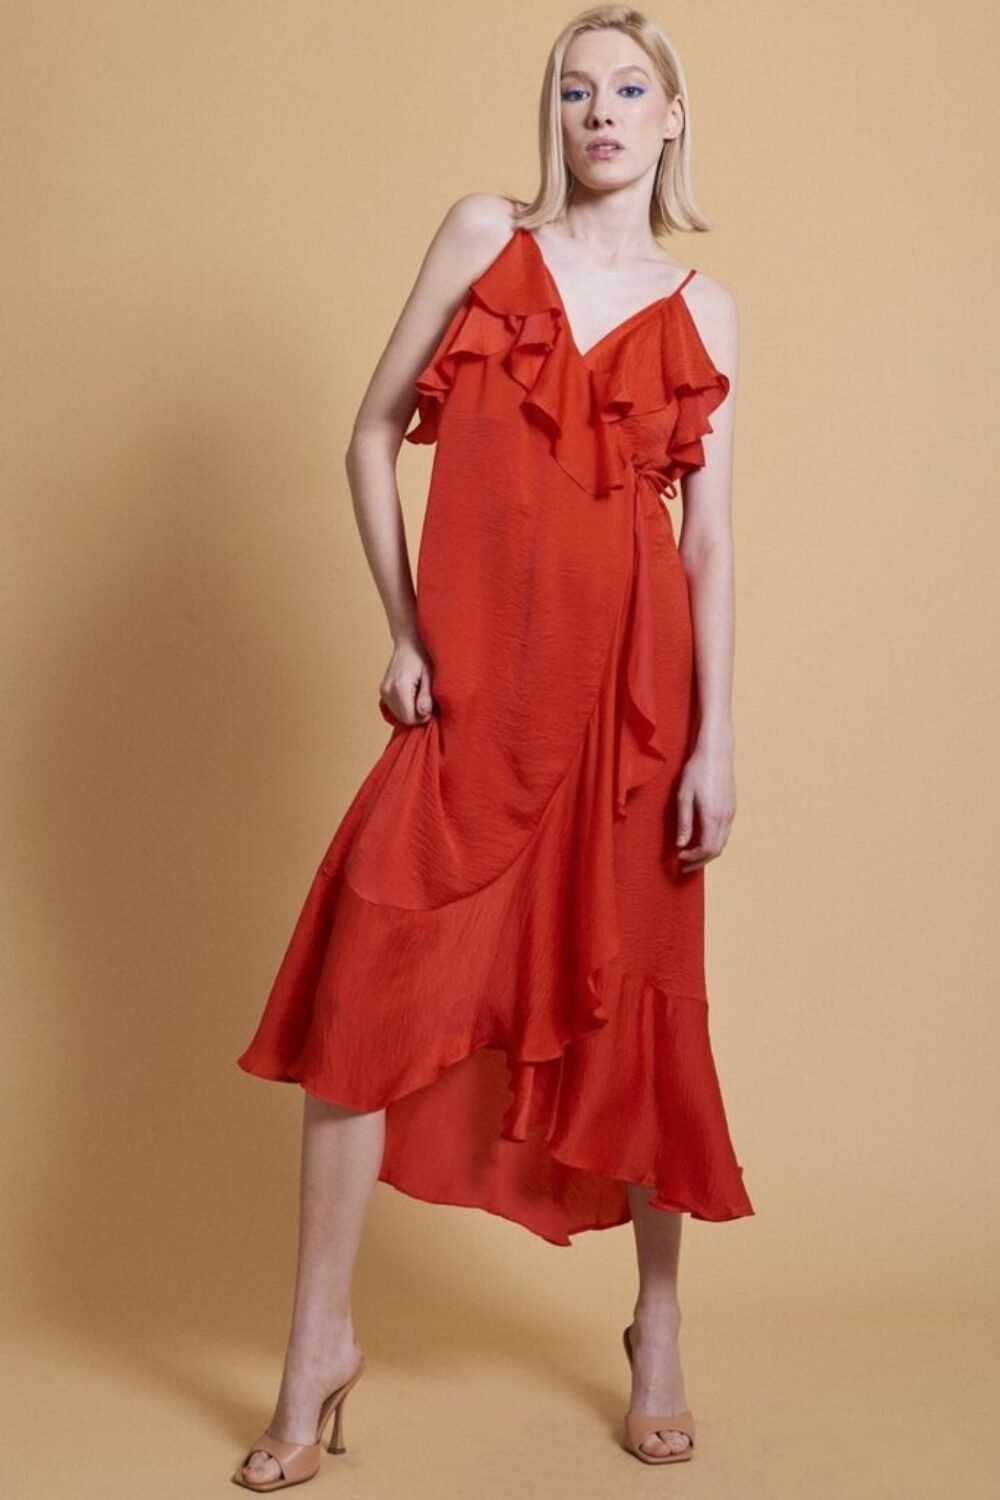 Shop Lux Red Silk Blend Maxi Wrap Ruffle Dress and women's luxury and designer clothes at www.lux-apparel.co.uk